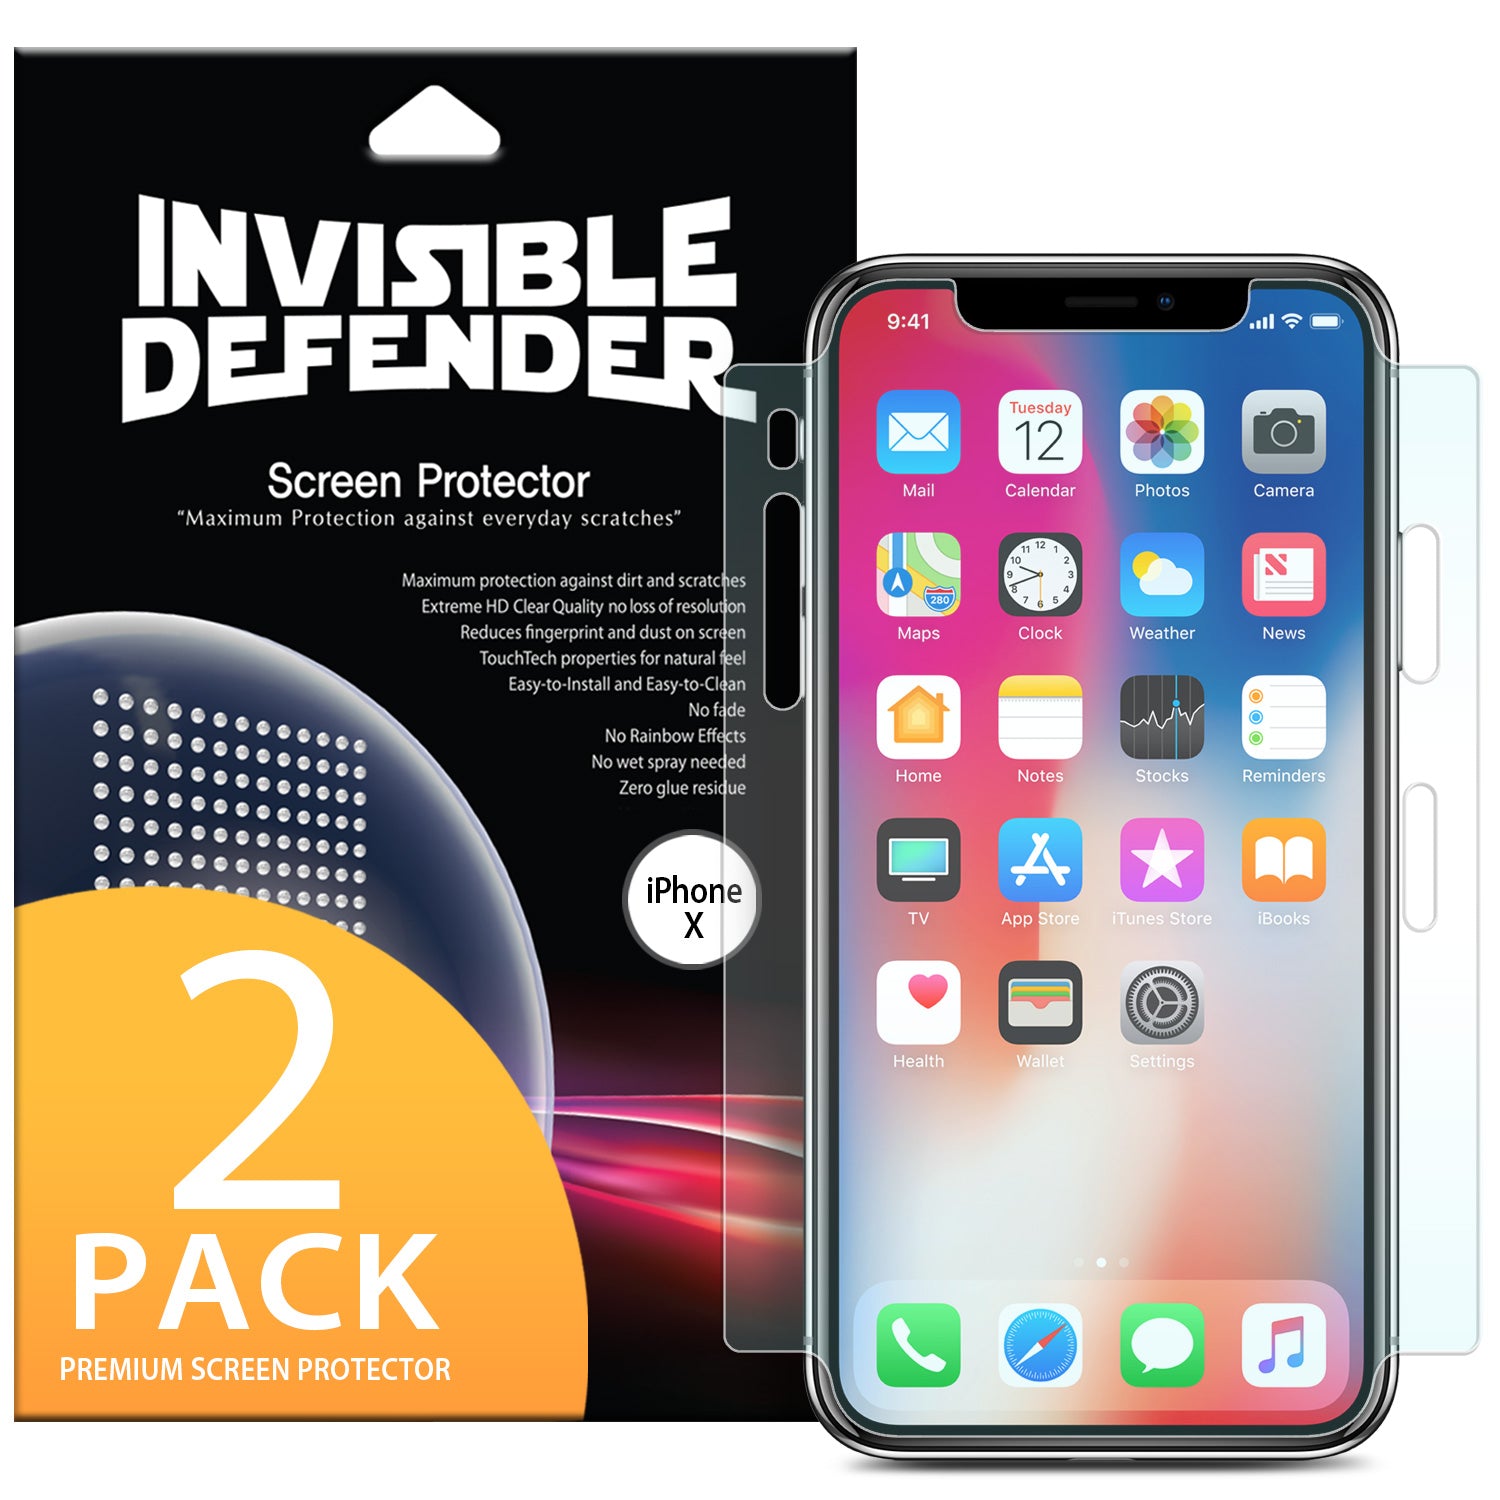 iPhone X Screen Protector | Invisible Defender